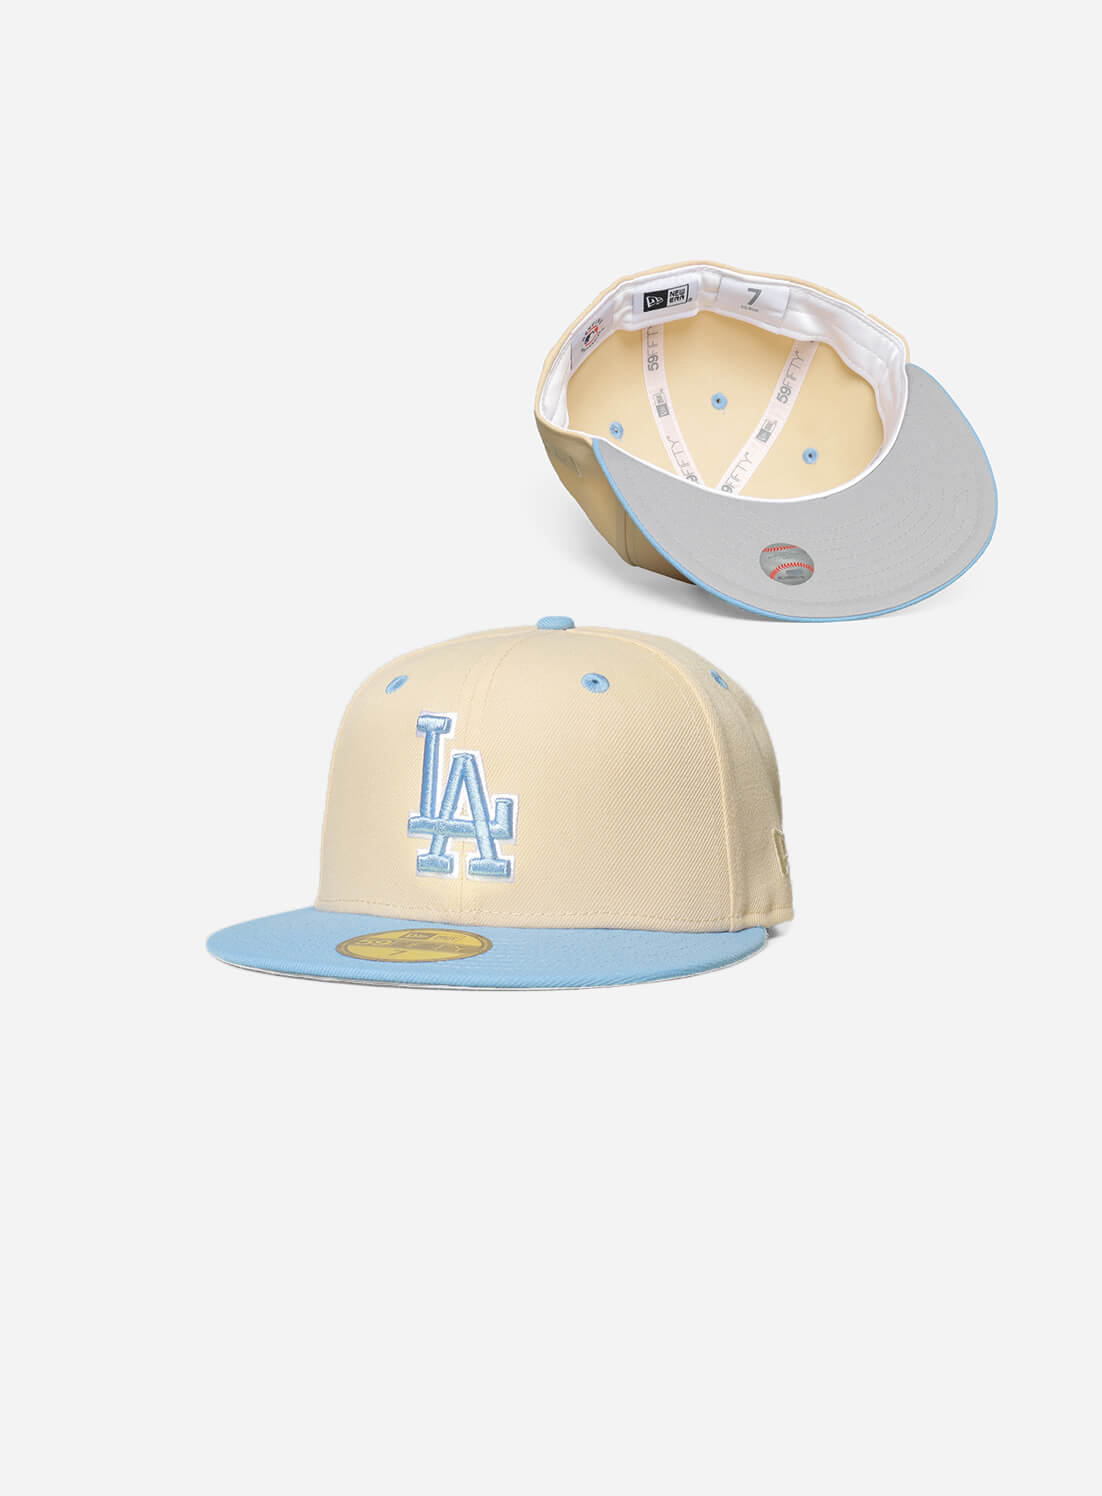 Los Angeles Dodgers Iced Latte 59Fifty Fitted